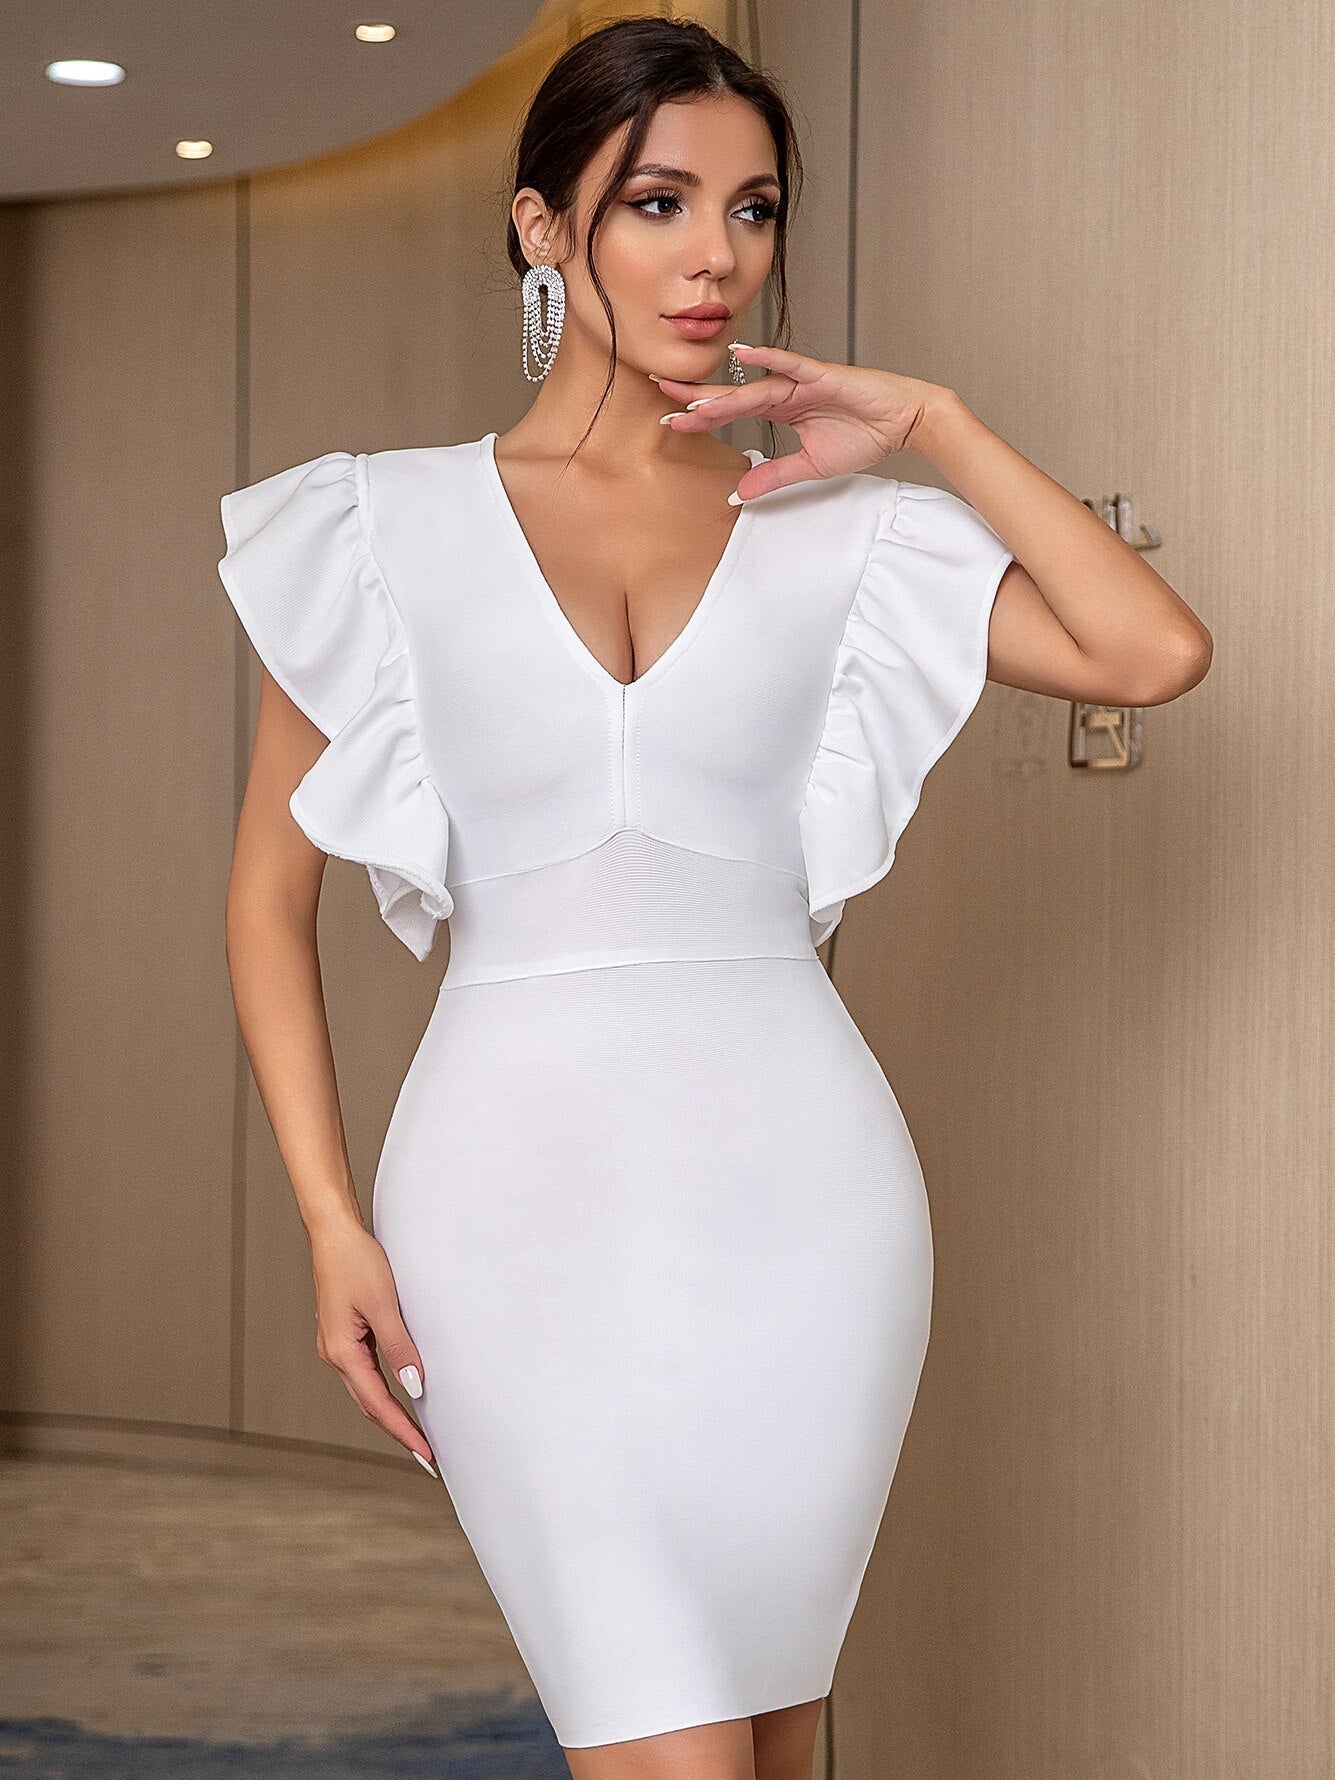 Dileoo V Neck Ruffles White Bodycon Bandage Dress Women Elegant Summer Short Butterfly Sleeve Club Celebrity Evening Party Outfit Dress